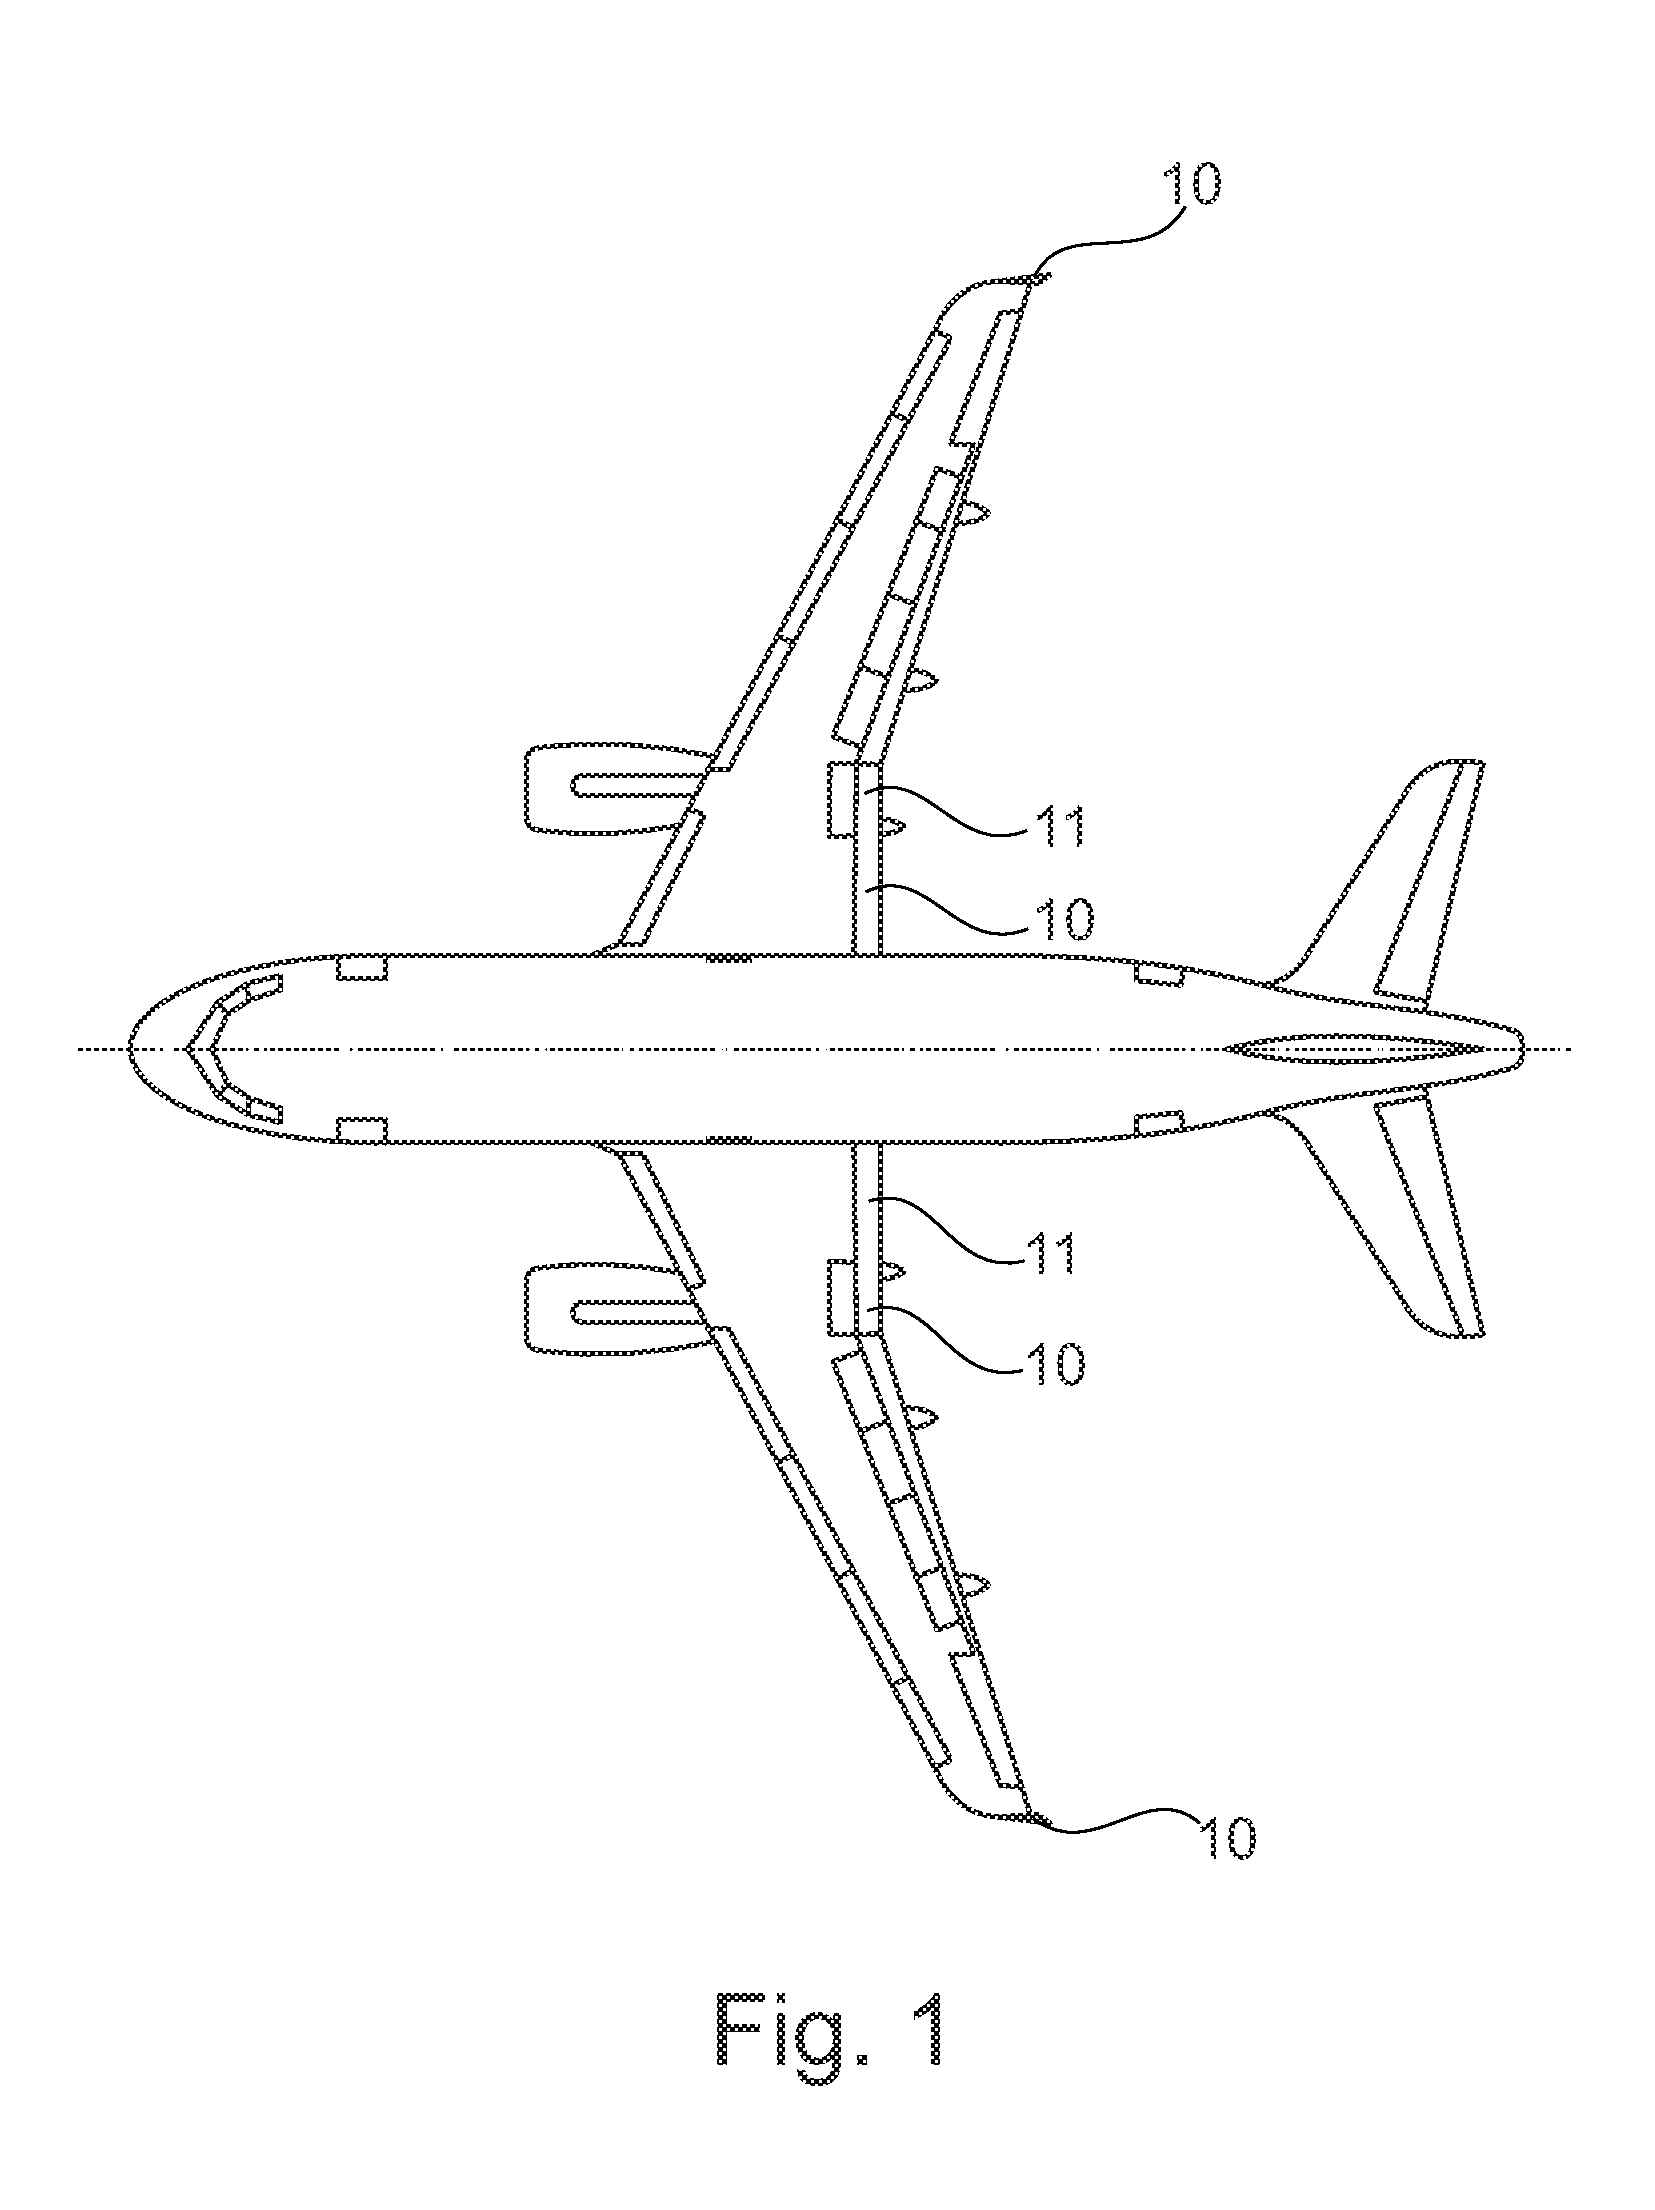 Morphing trailing edge device for an airfoil